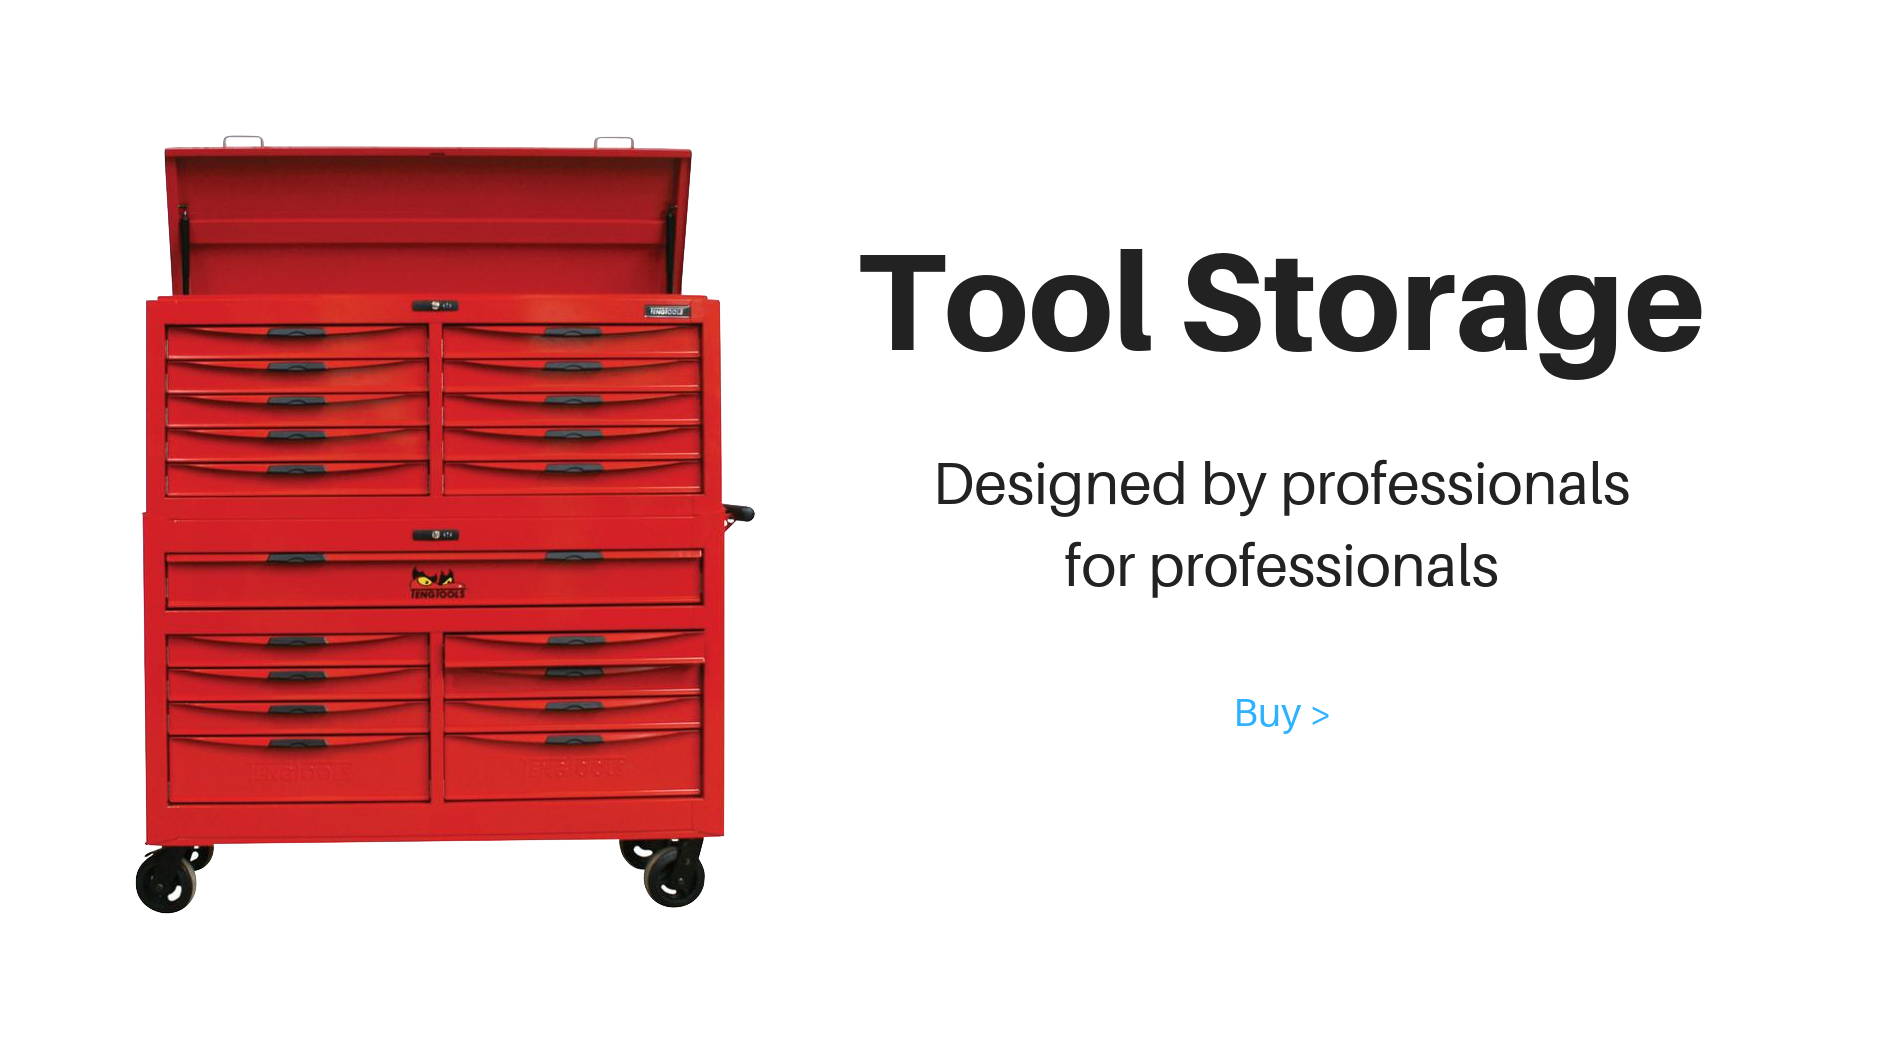 Tool Storage. Designed by professionals for professionals.